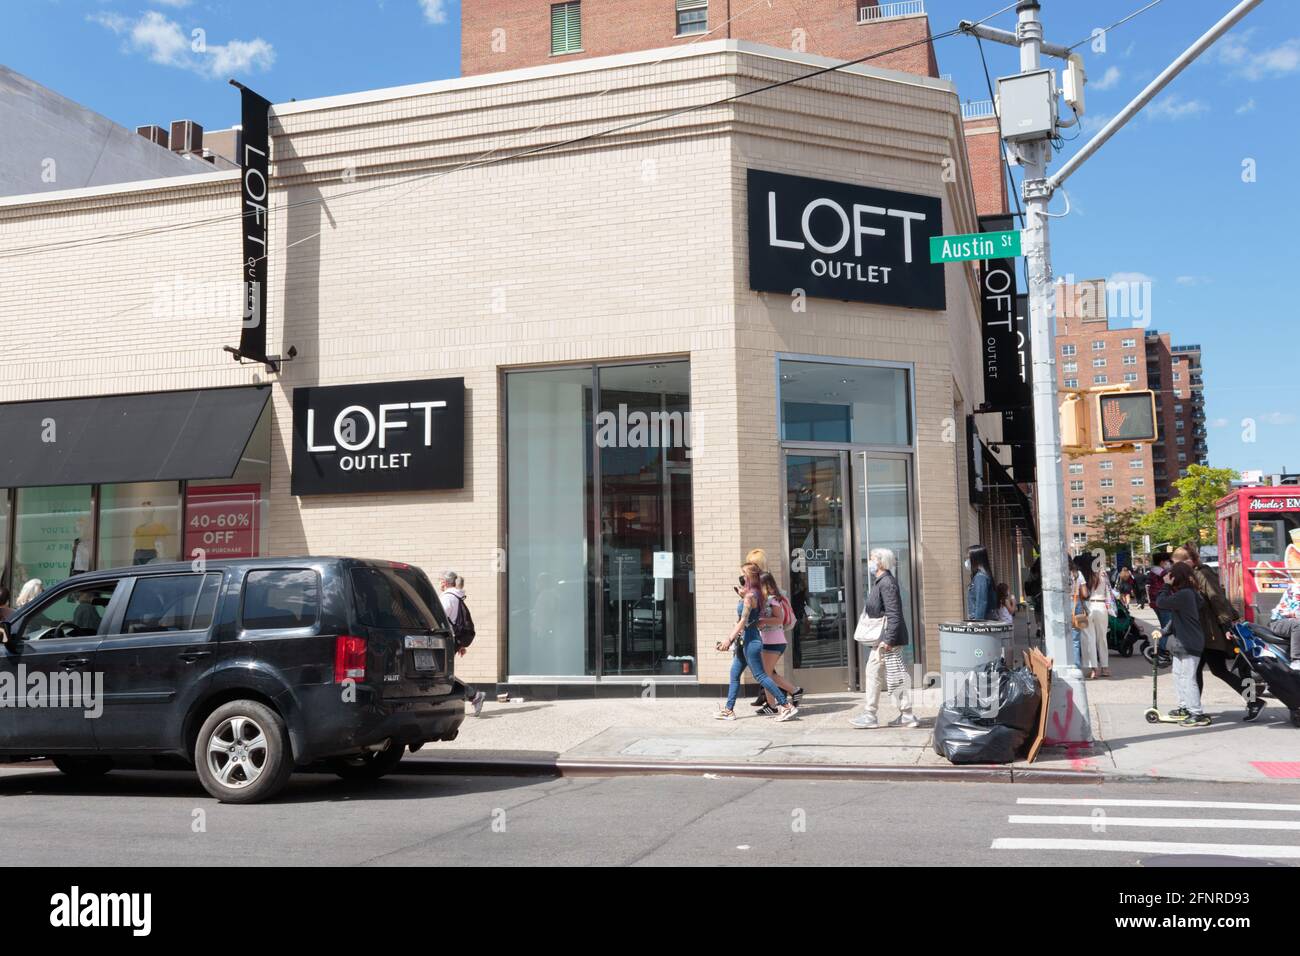 a Loft outlet store at the corner of Austin street and 70th Road in Forest HIlls, Queens New York, an Ann Taylor brand retail clothing chain Stock Photo